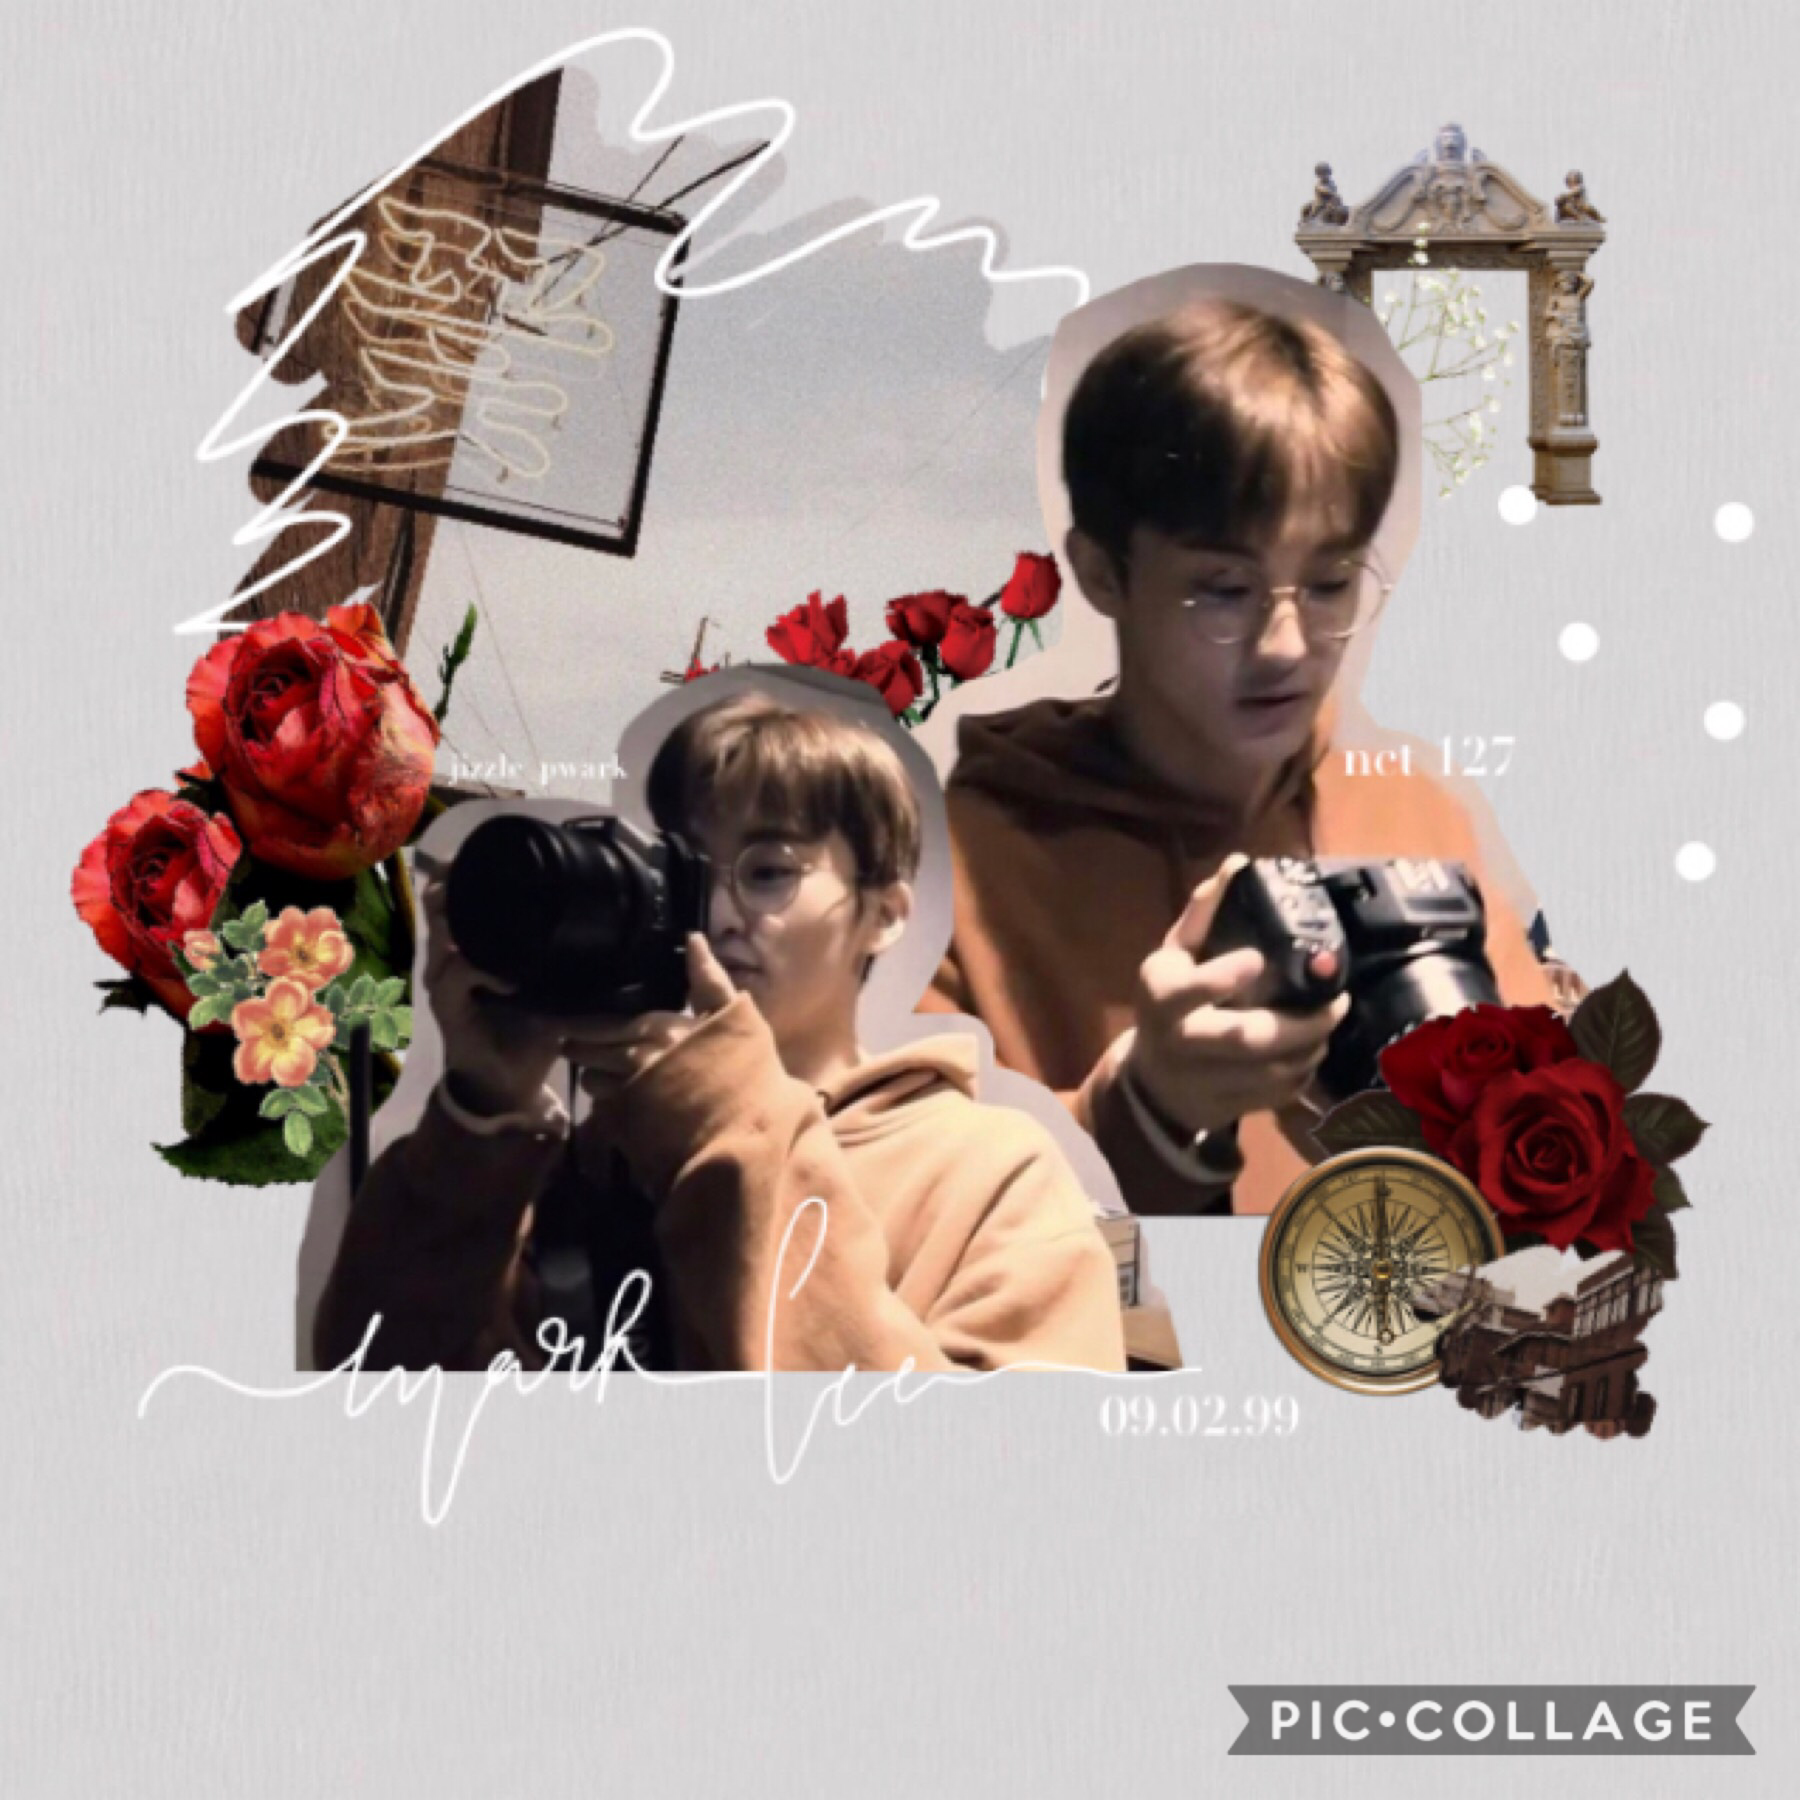 TAP
MARK LEE EDIT INSPIRED BY THE TALENTED @itsxdrea!!!! 💜💜💜
